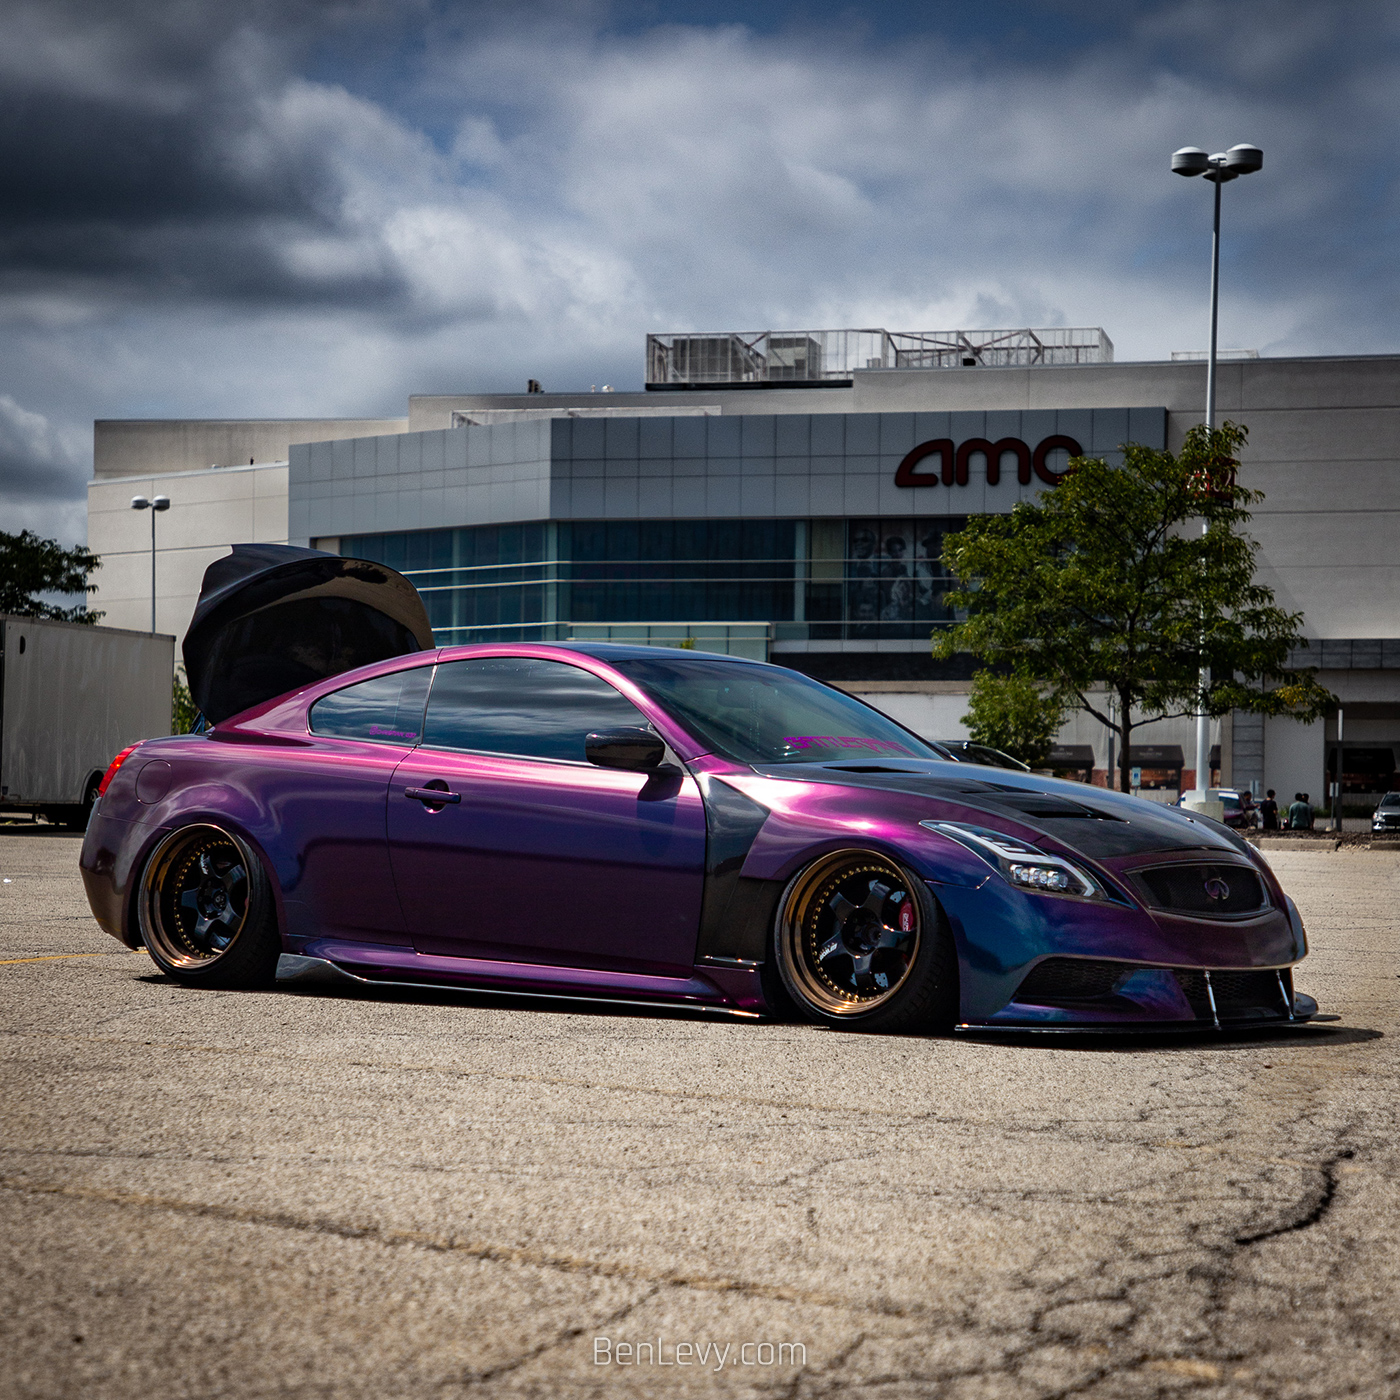 Bagged Infiniti G37 Coupe at North Suburbs Cars & Coffee